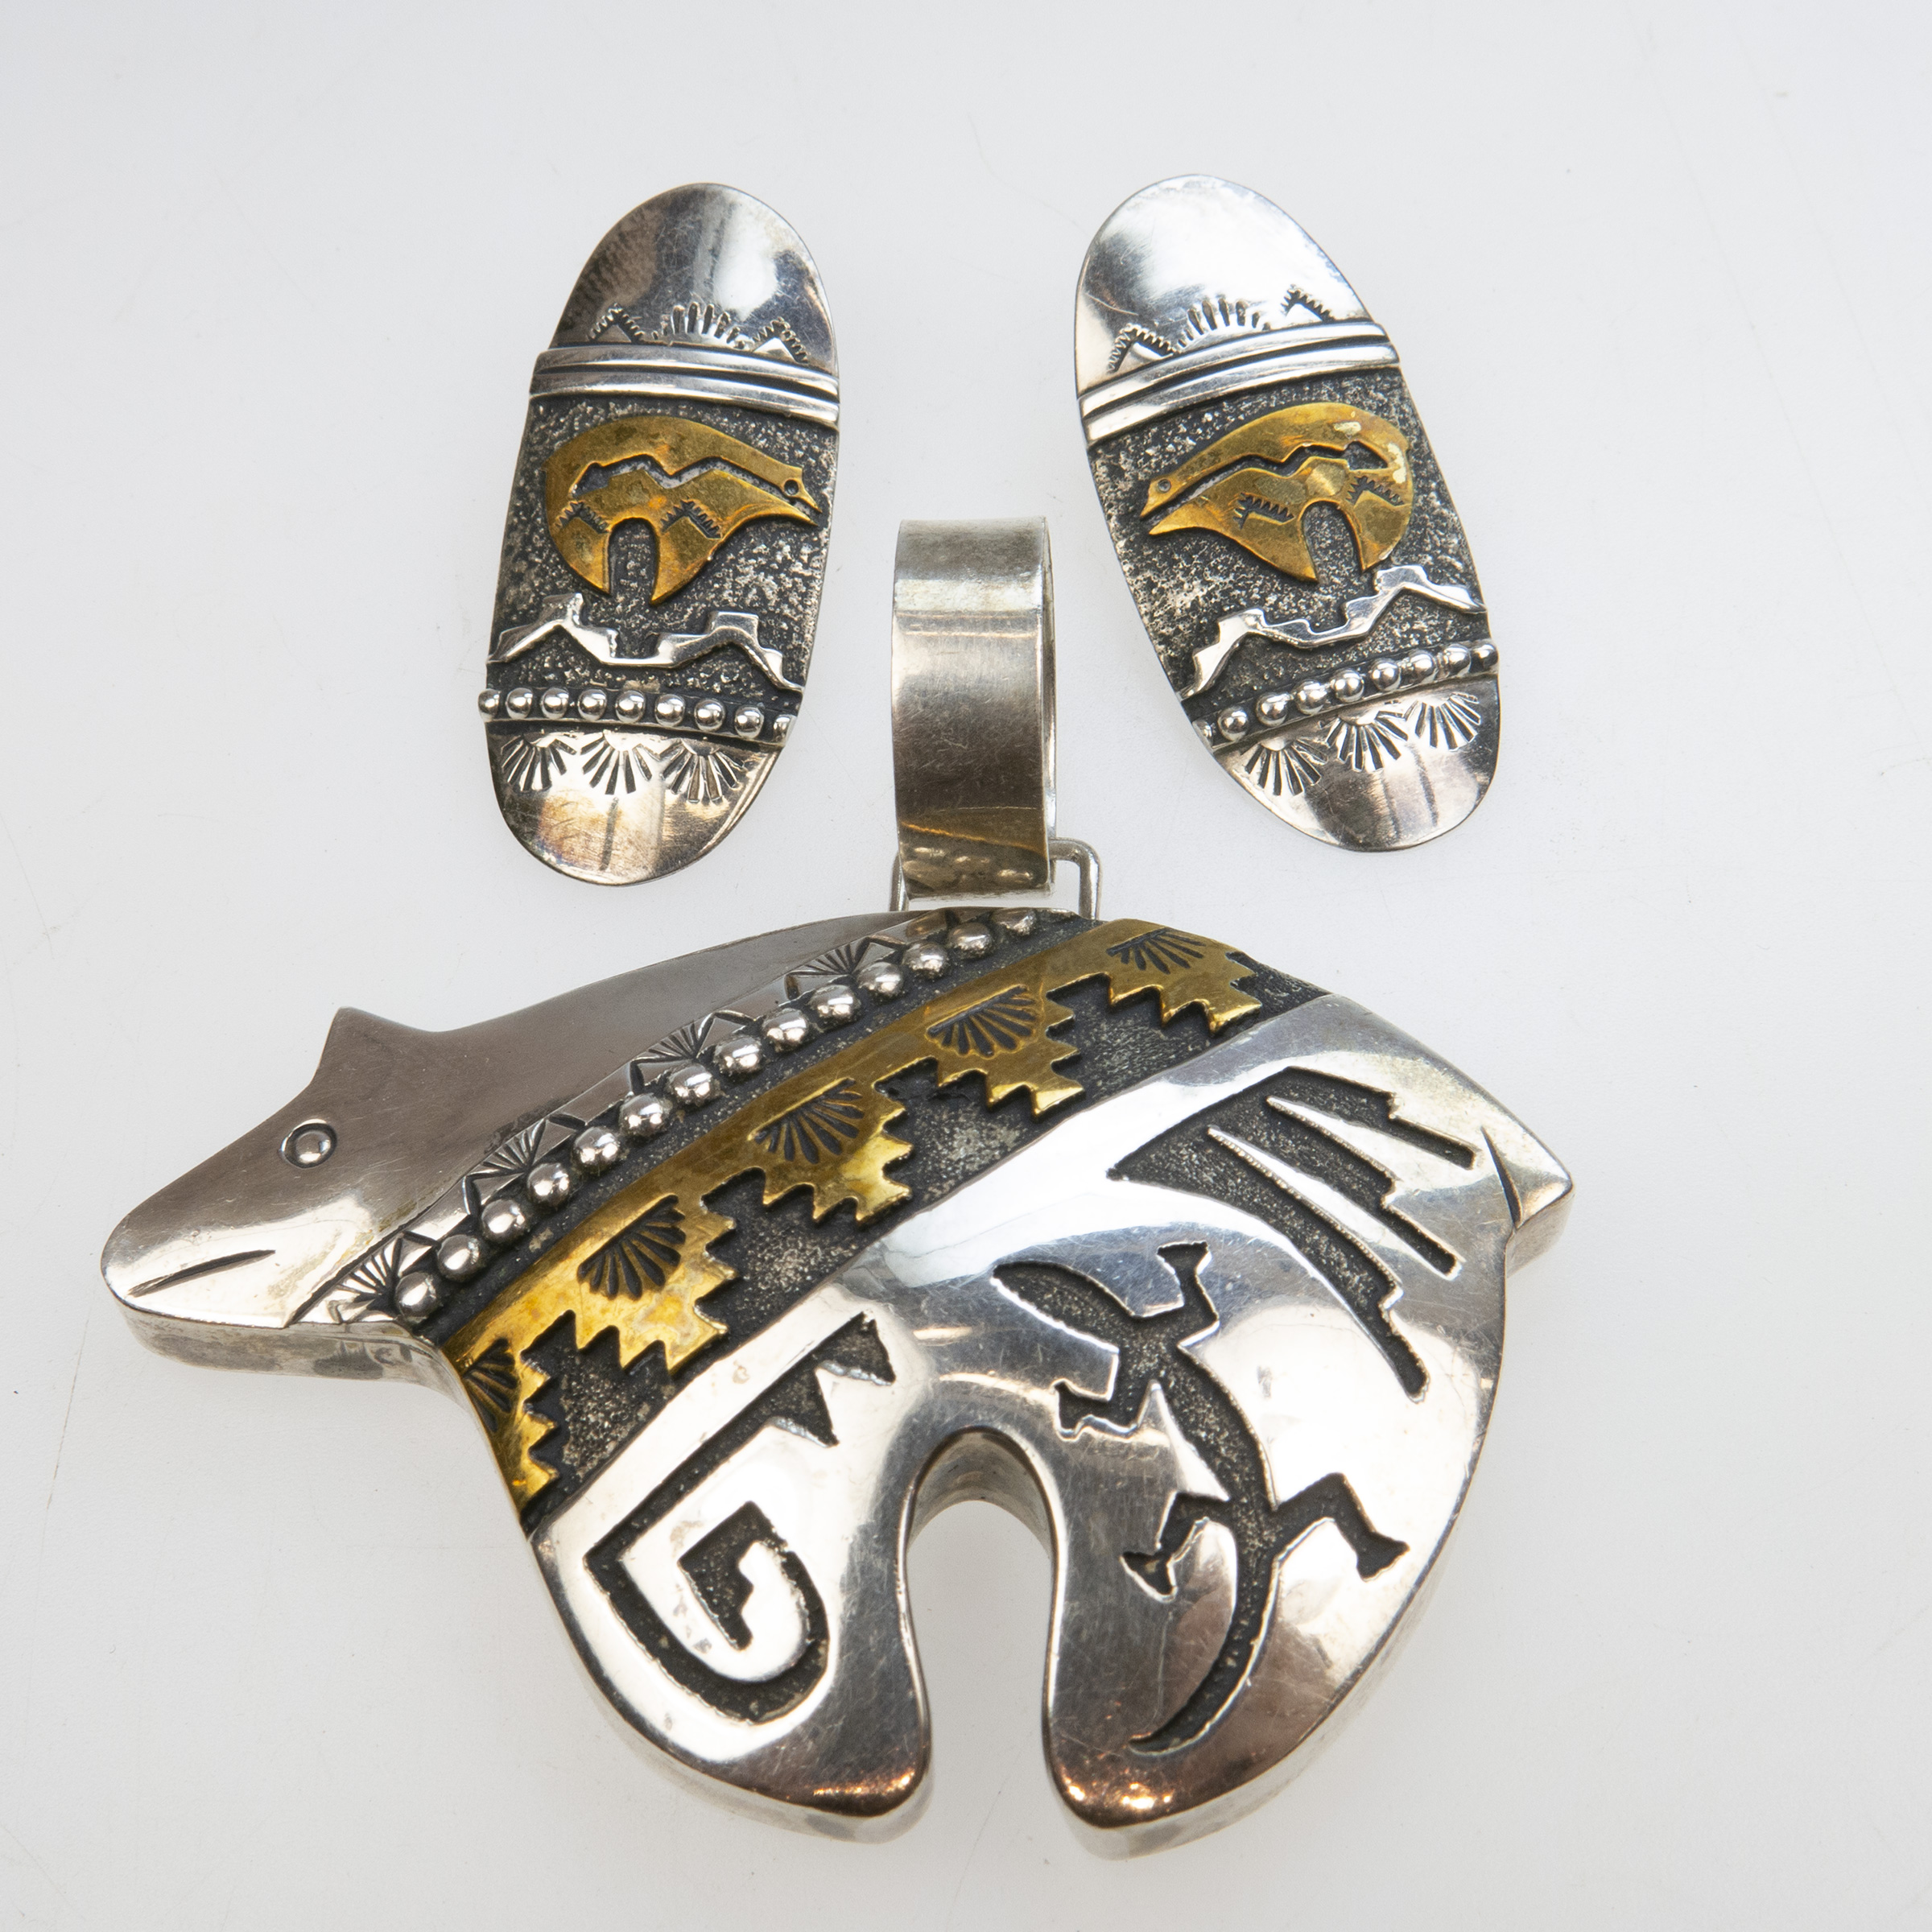 Tommy Singer Navajo Silver With Gold Overlay Pendant And Earrings